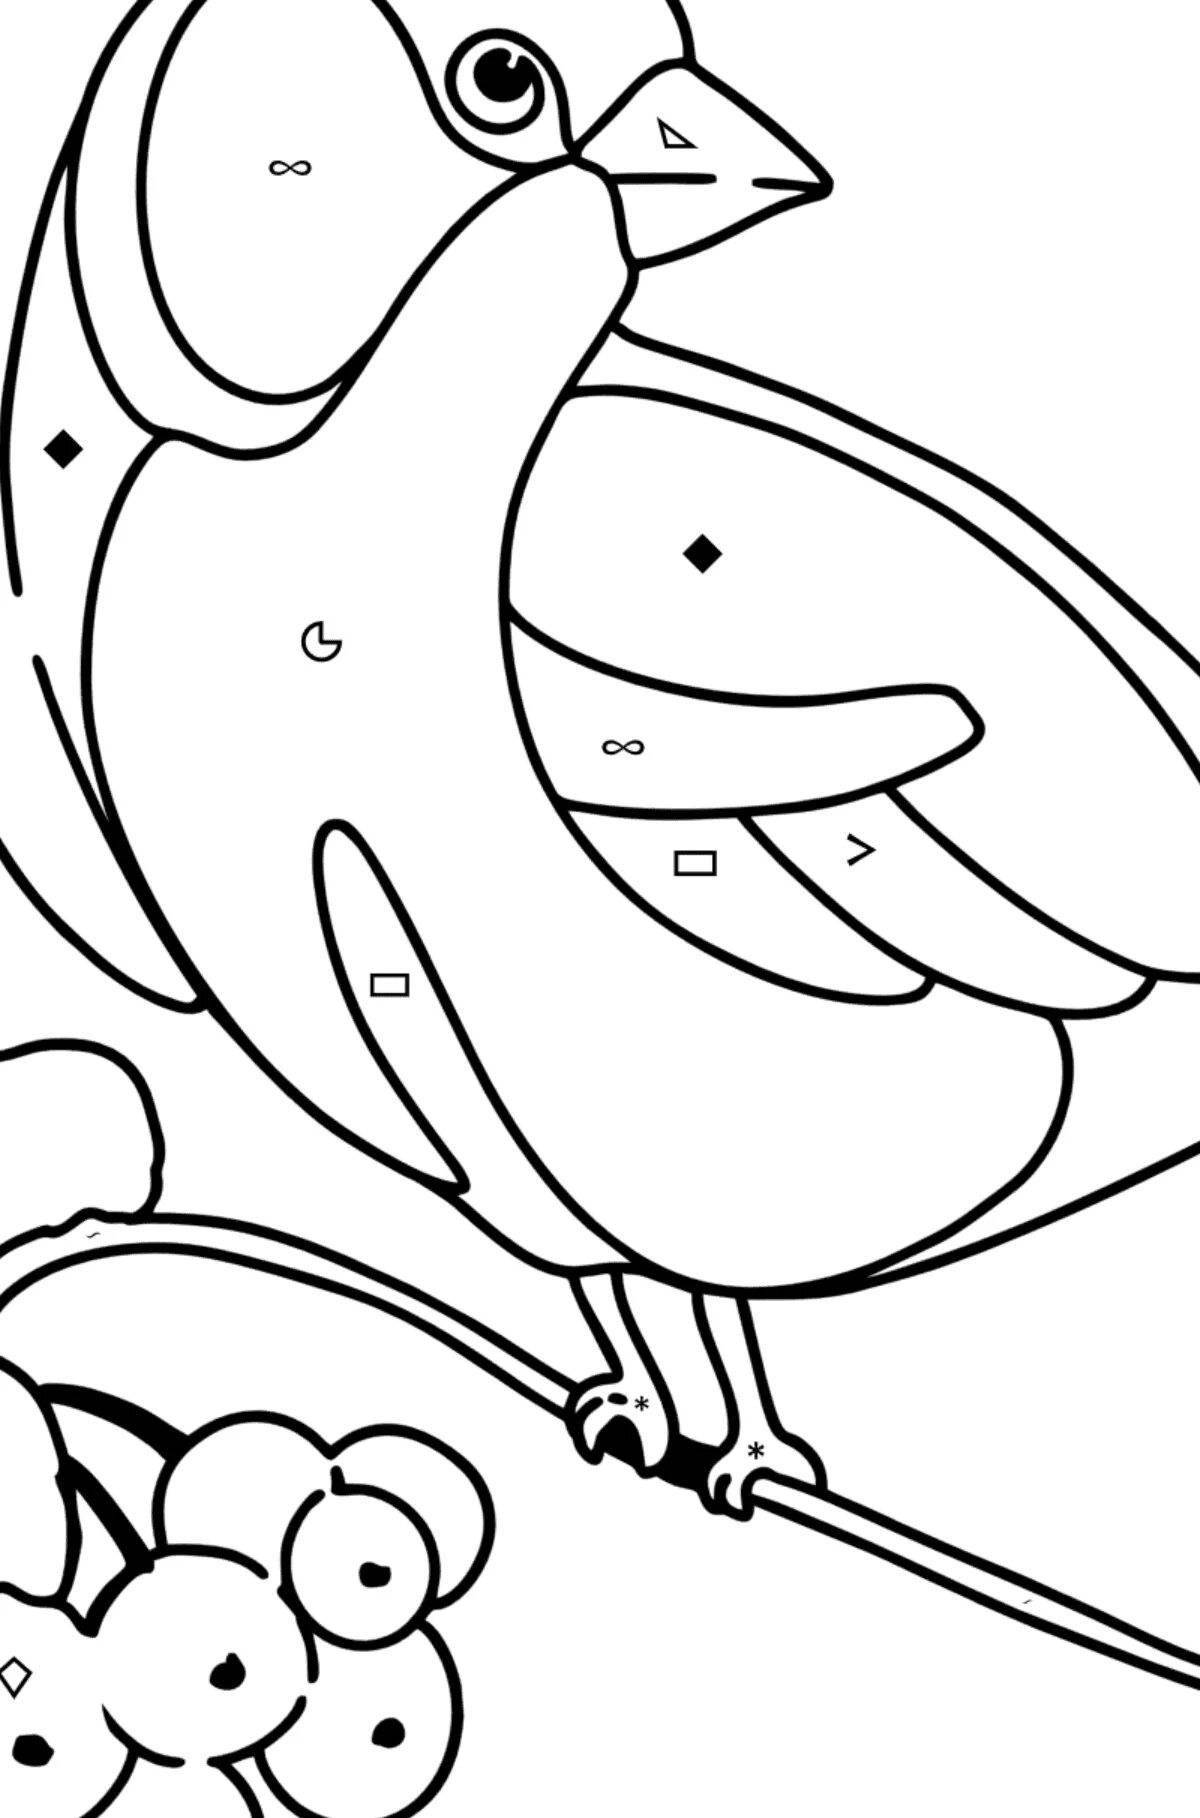 Colouring funny titmouse for children 6-7 years old